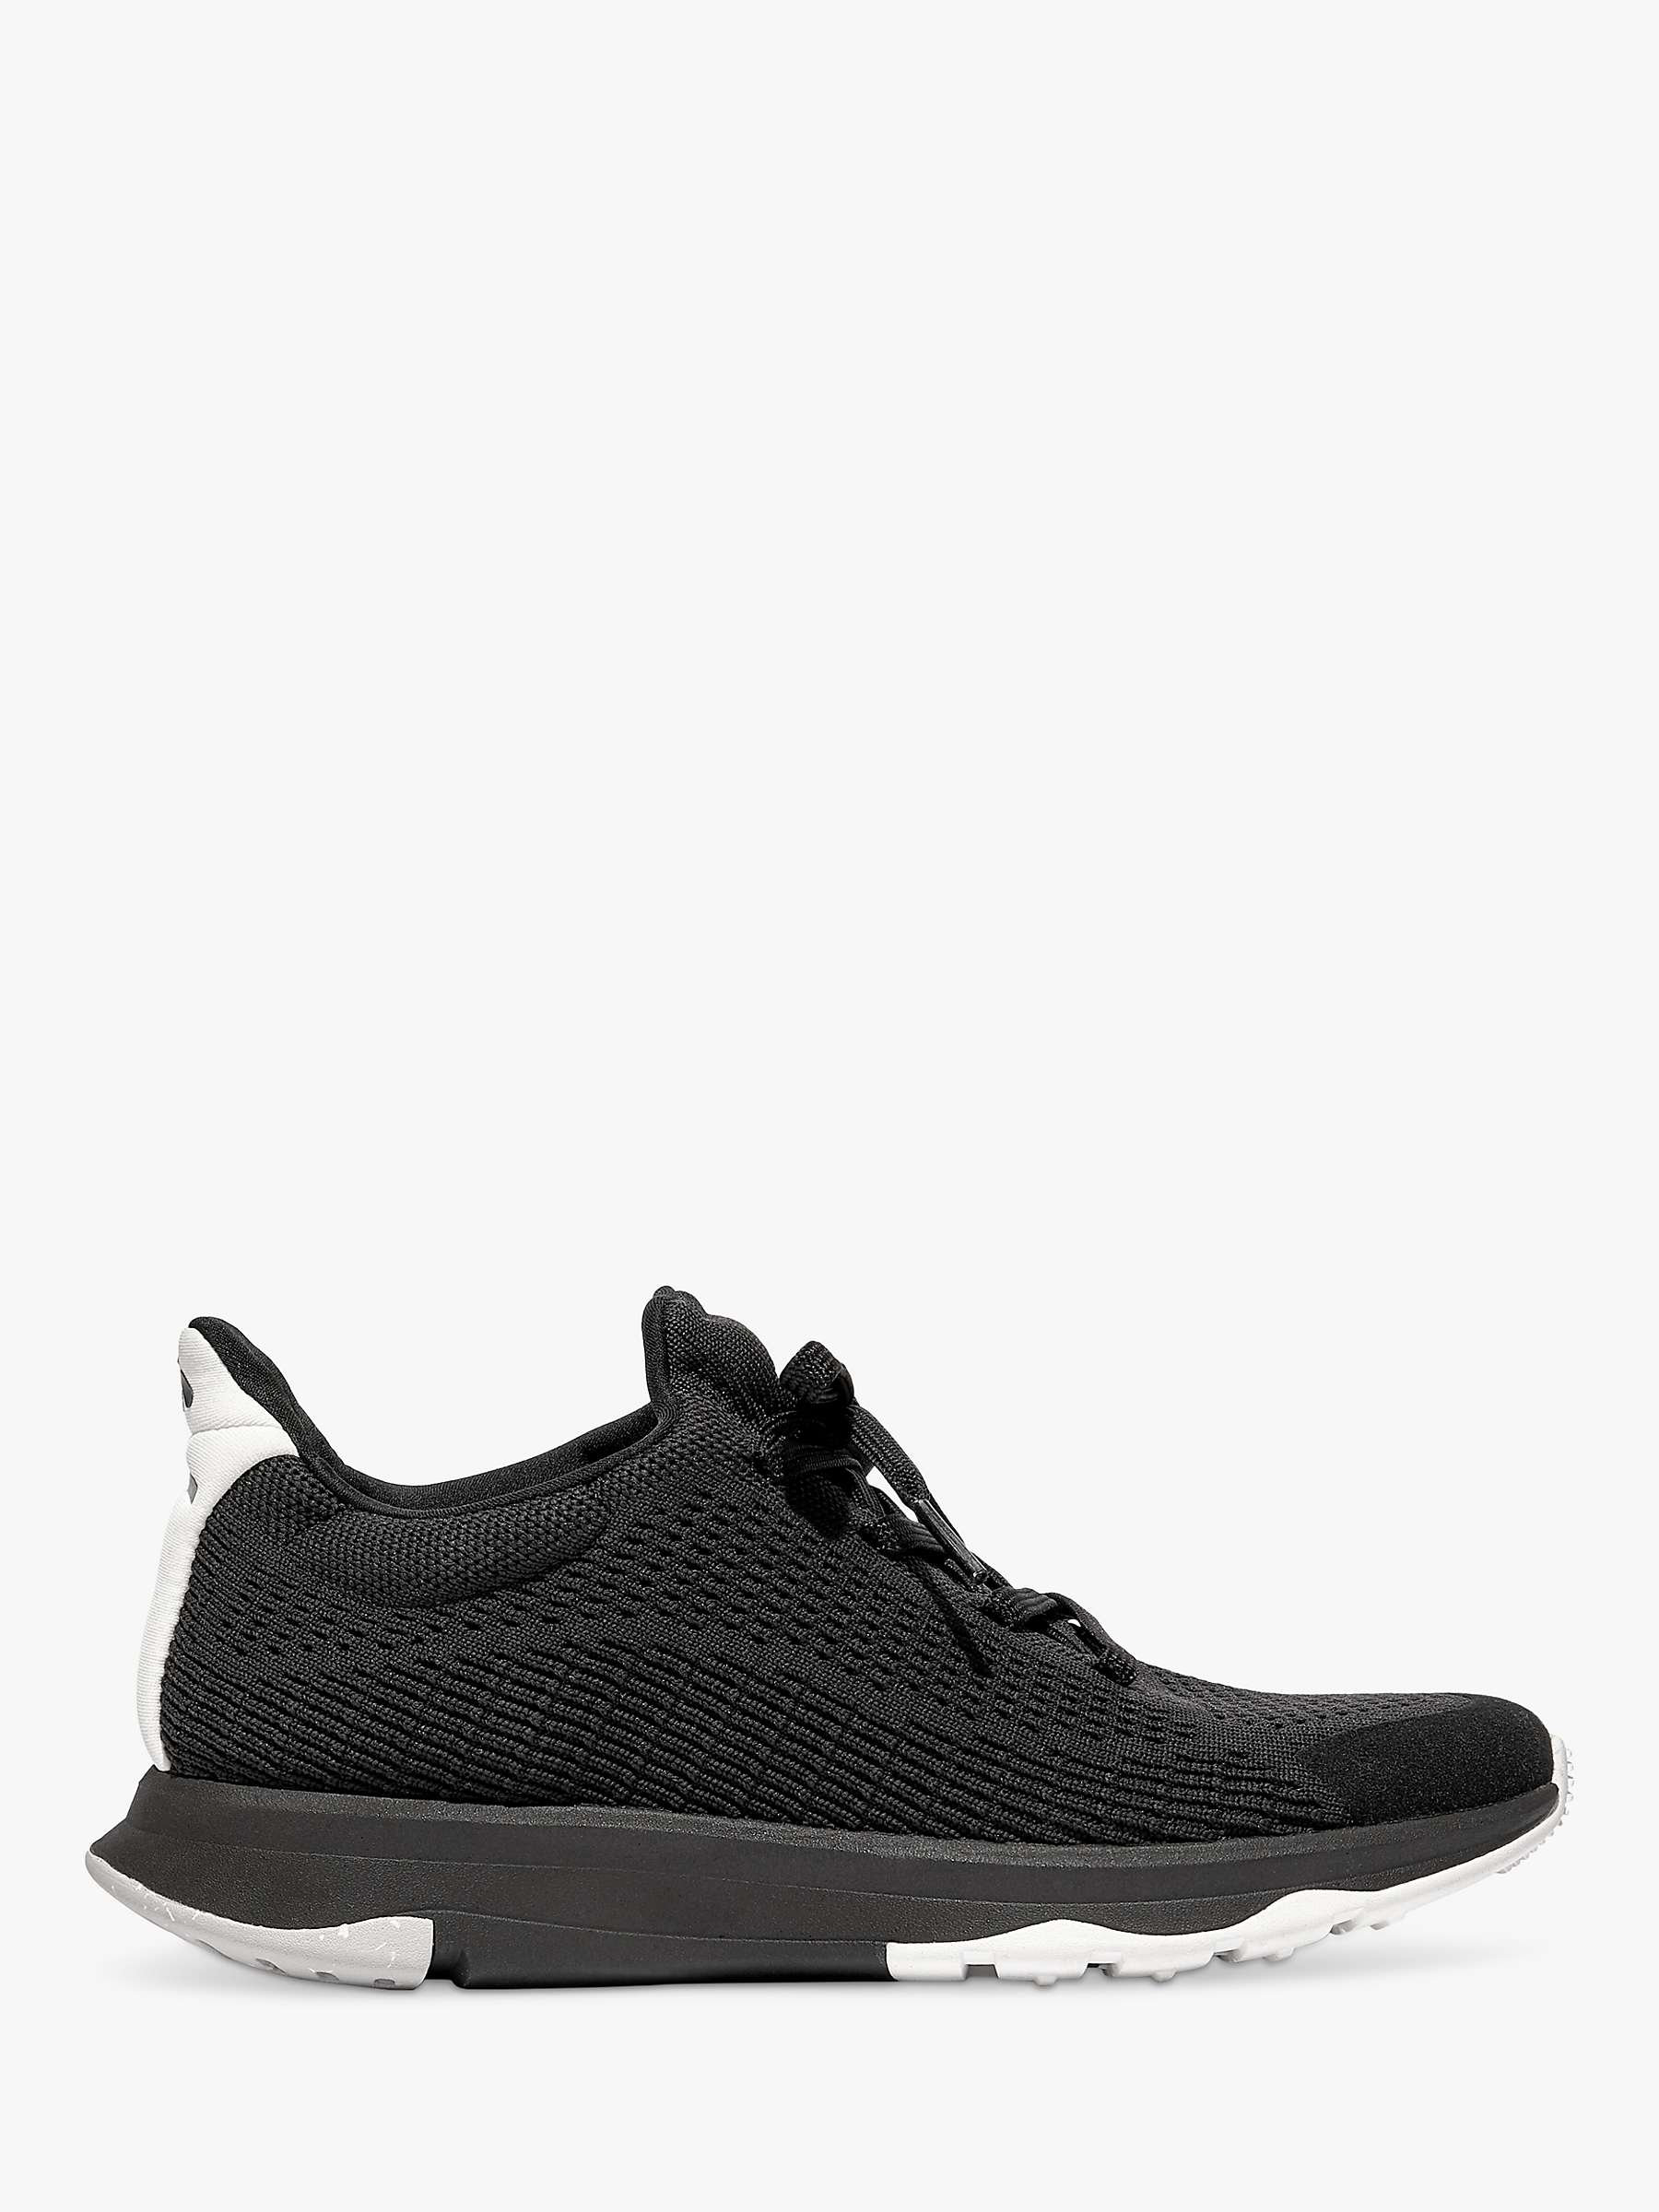 Buy FitFlop Vitamin FFX E01 Lace Up Trainers, Black Online at johnlewis.com